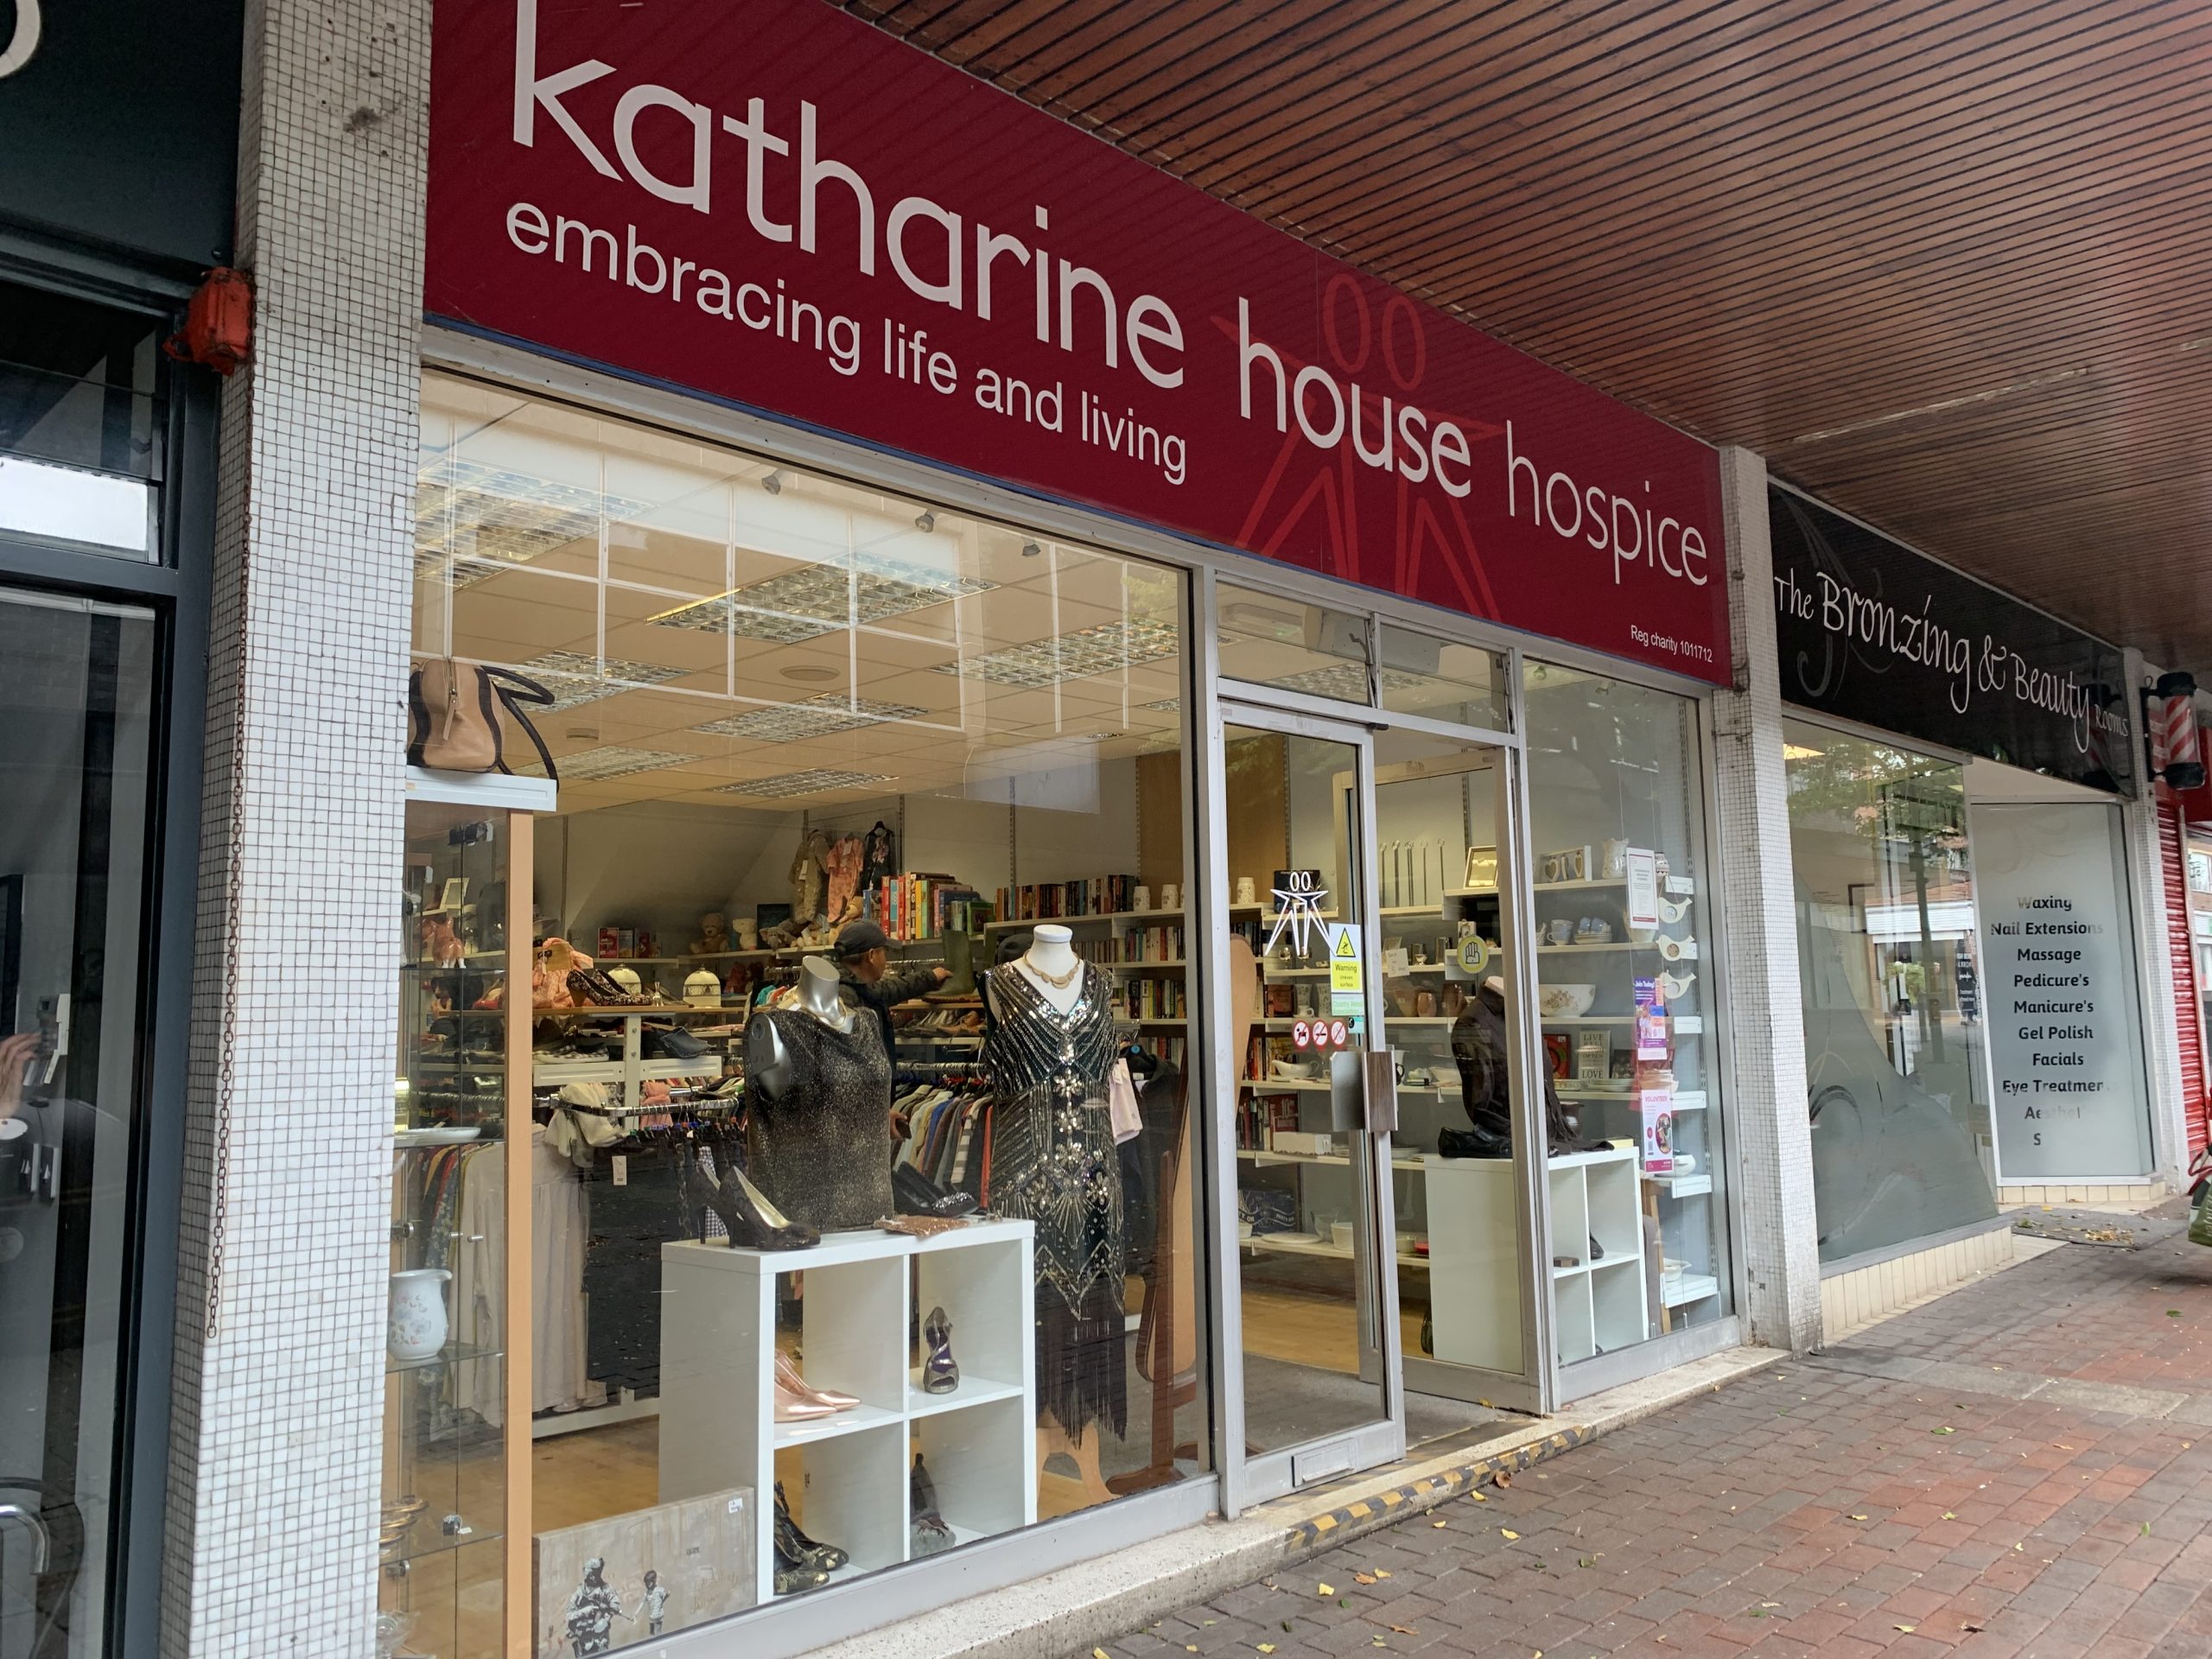 Photo of a shop front, the sign reads 'Katharine House Hospice'